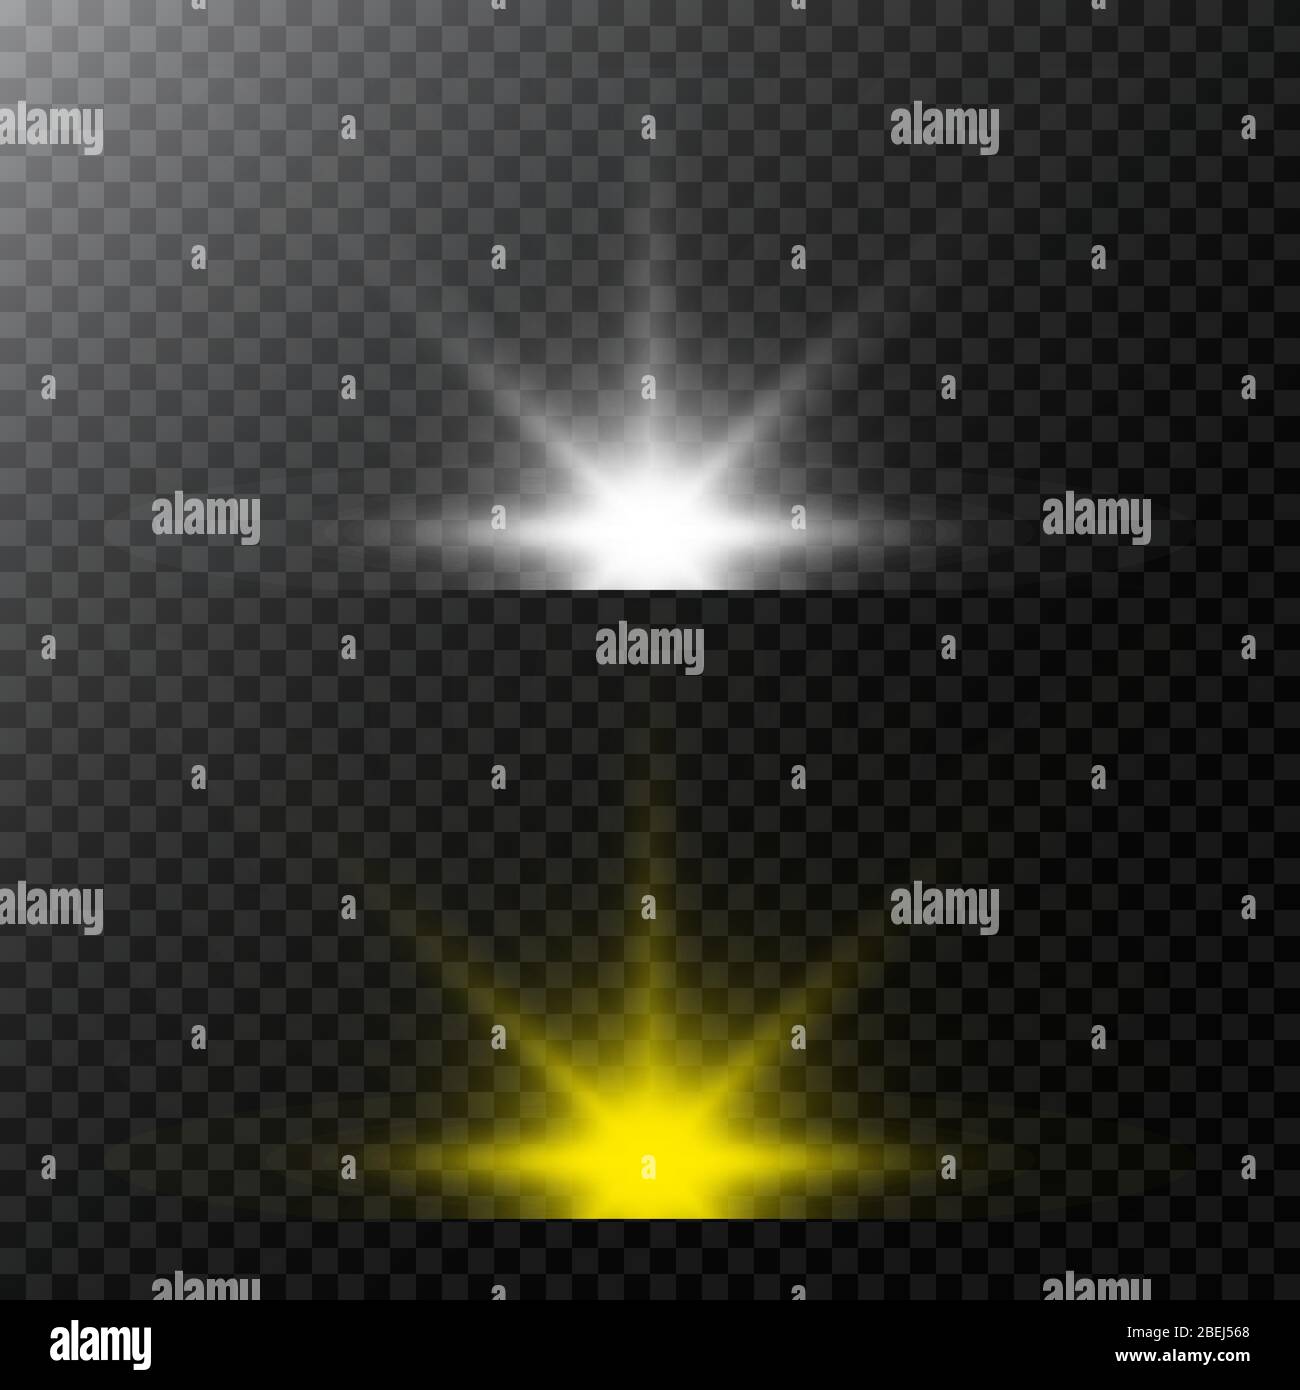 Set of Vector glowing light effect stars bursts with sparkles and flare, explosion on transparent background. Stock - Vector illustration. Stock Vector